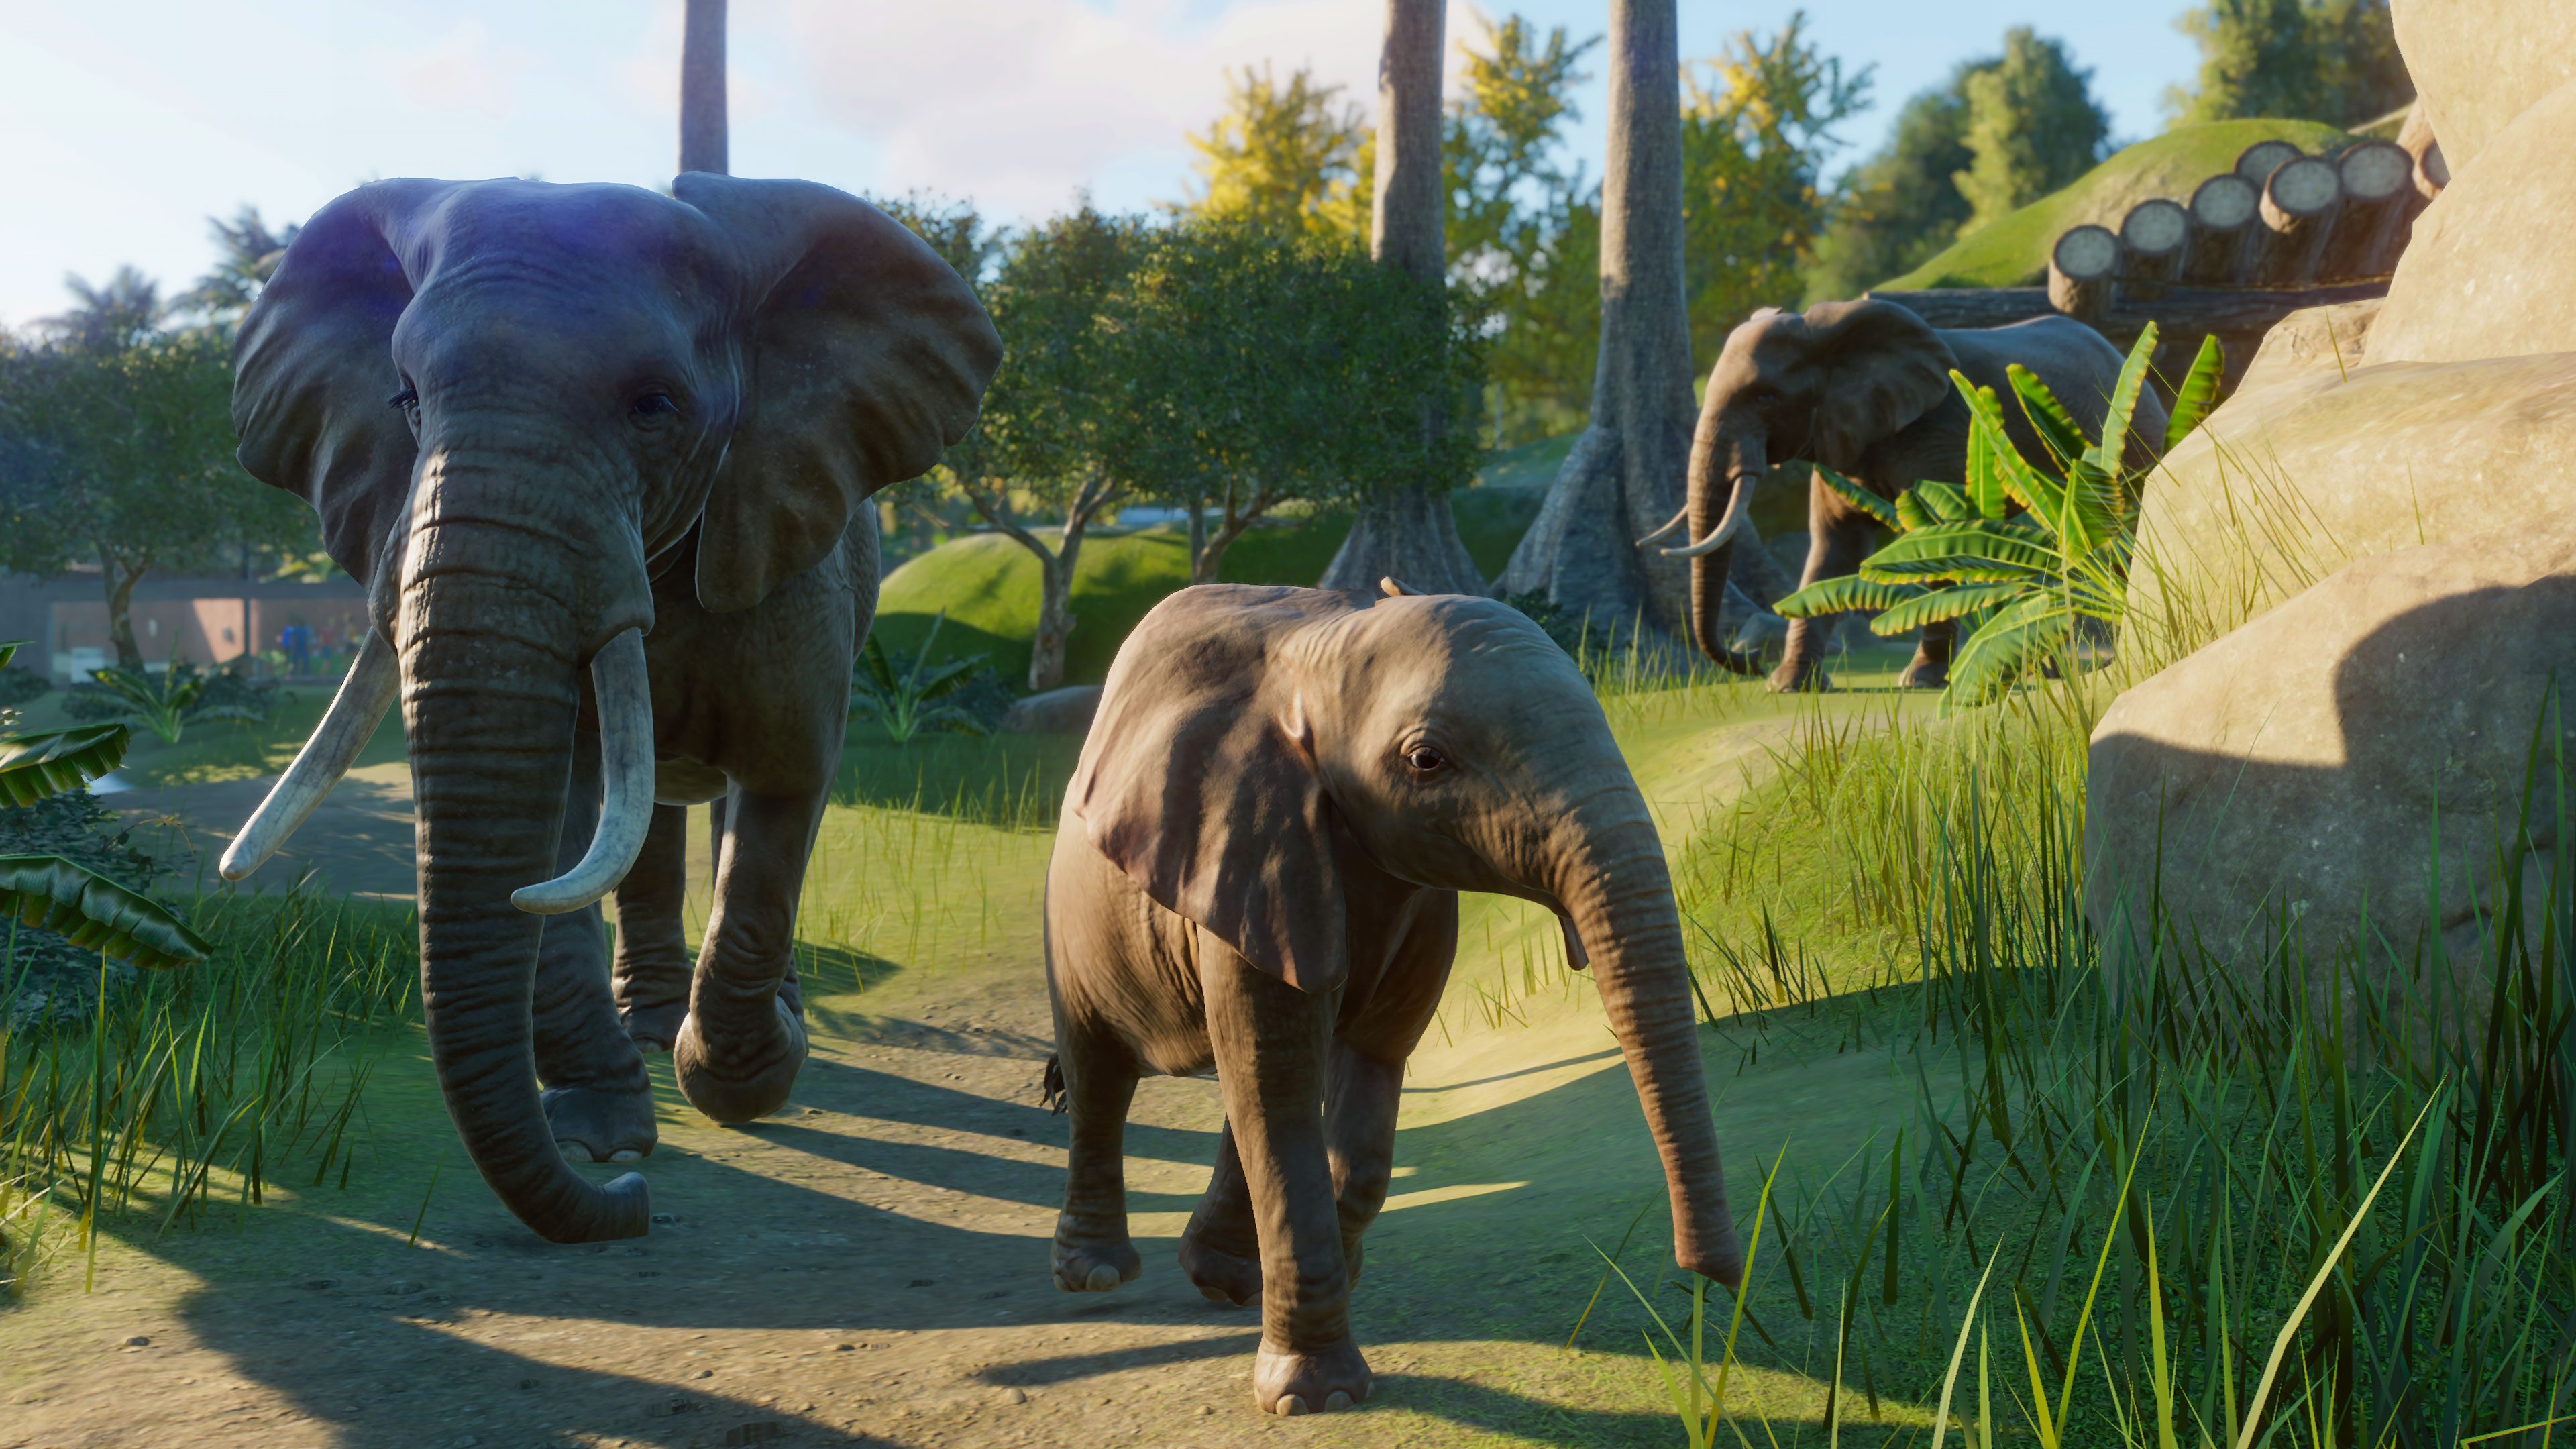 planet zoo 2 download